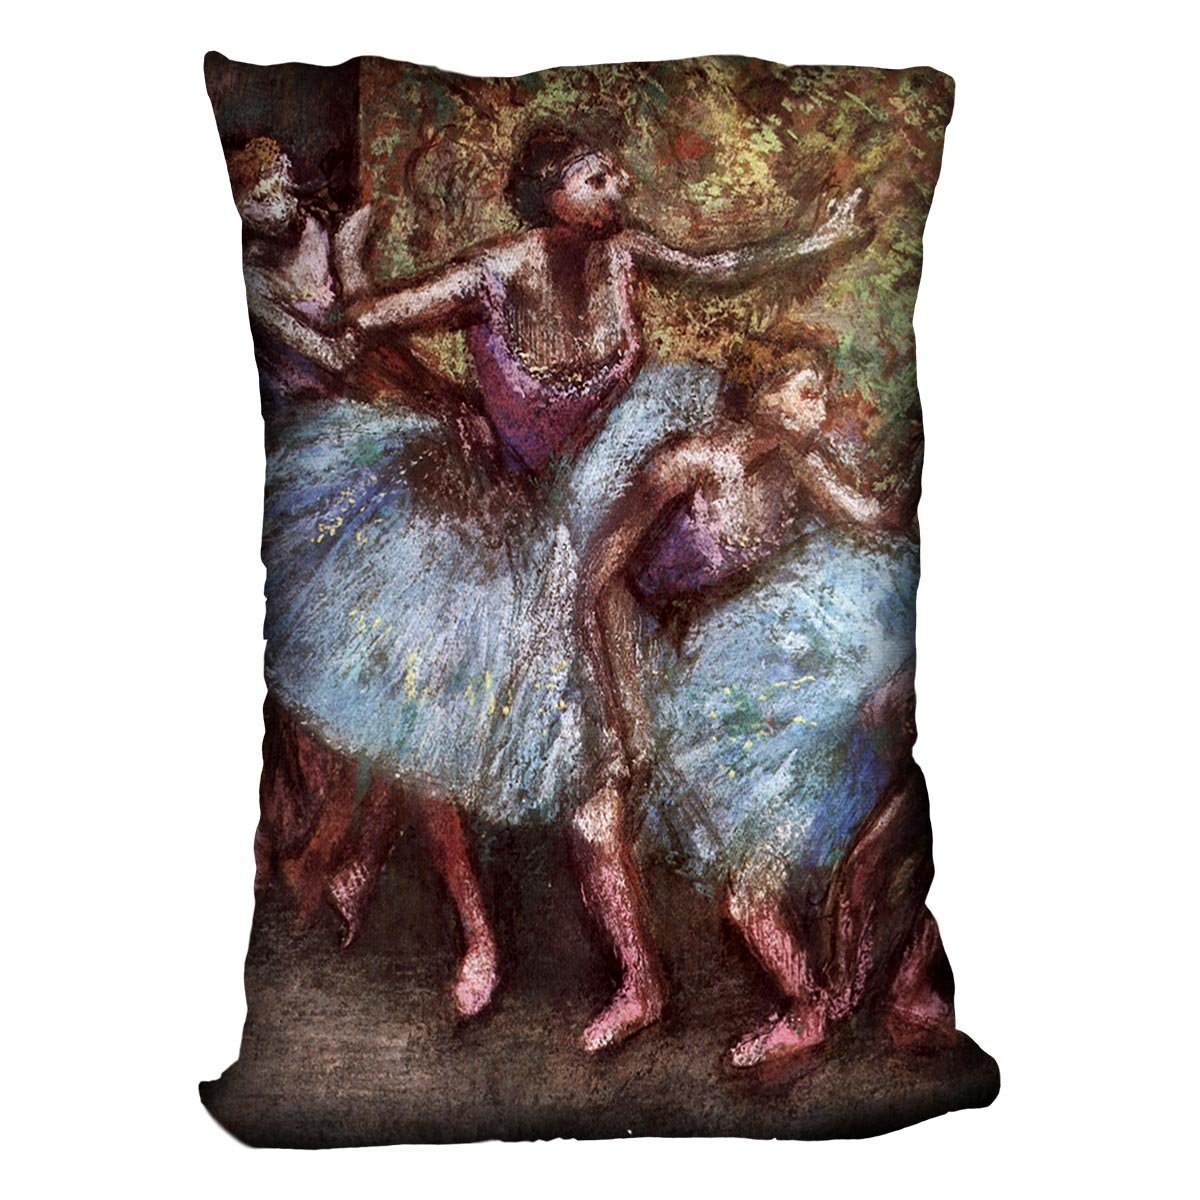 Four dancers behind the scenes 1 by Degas Cushion